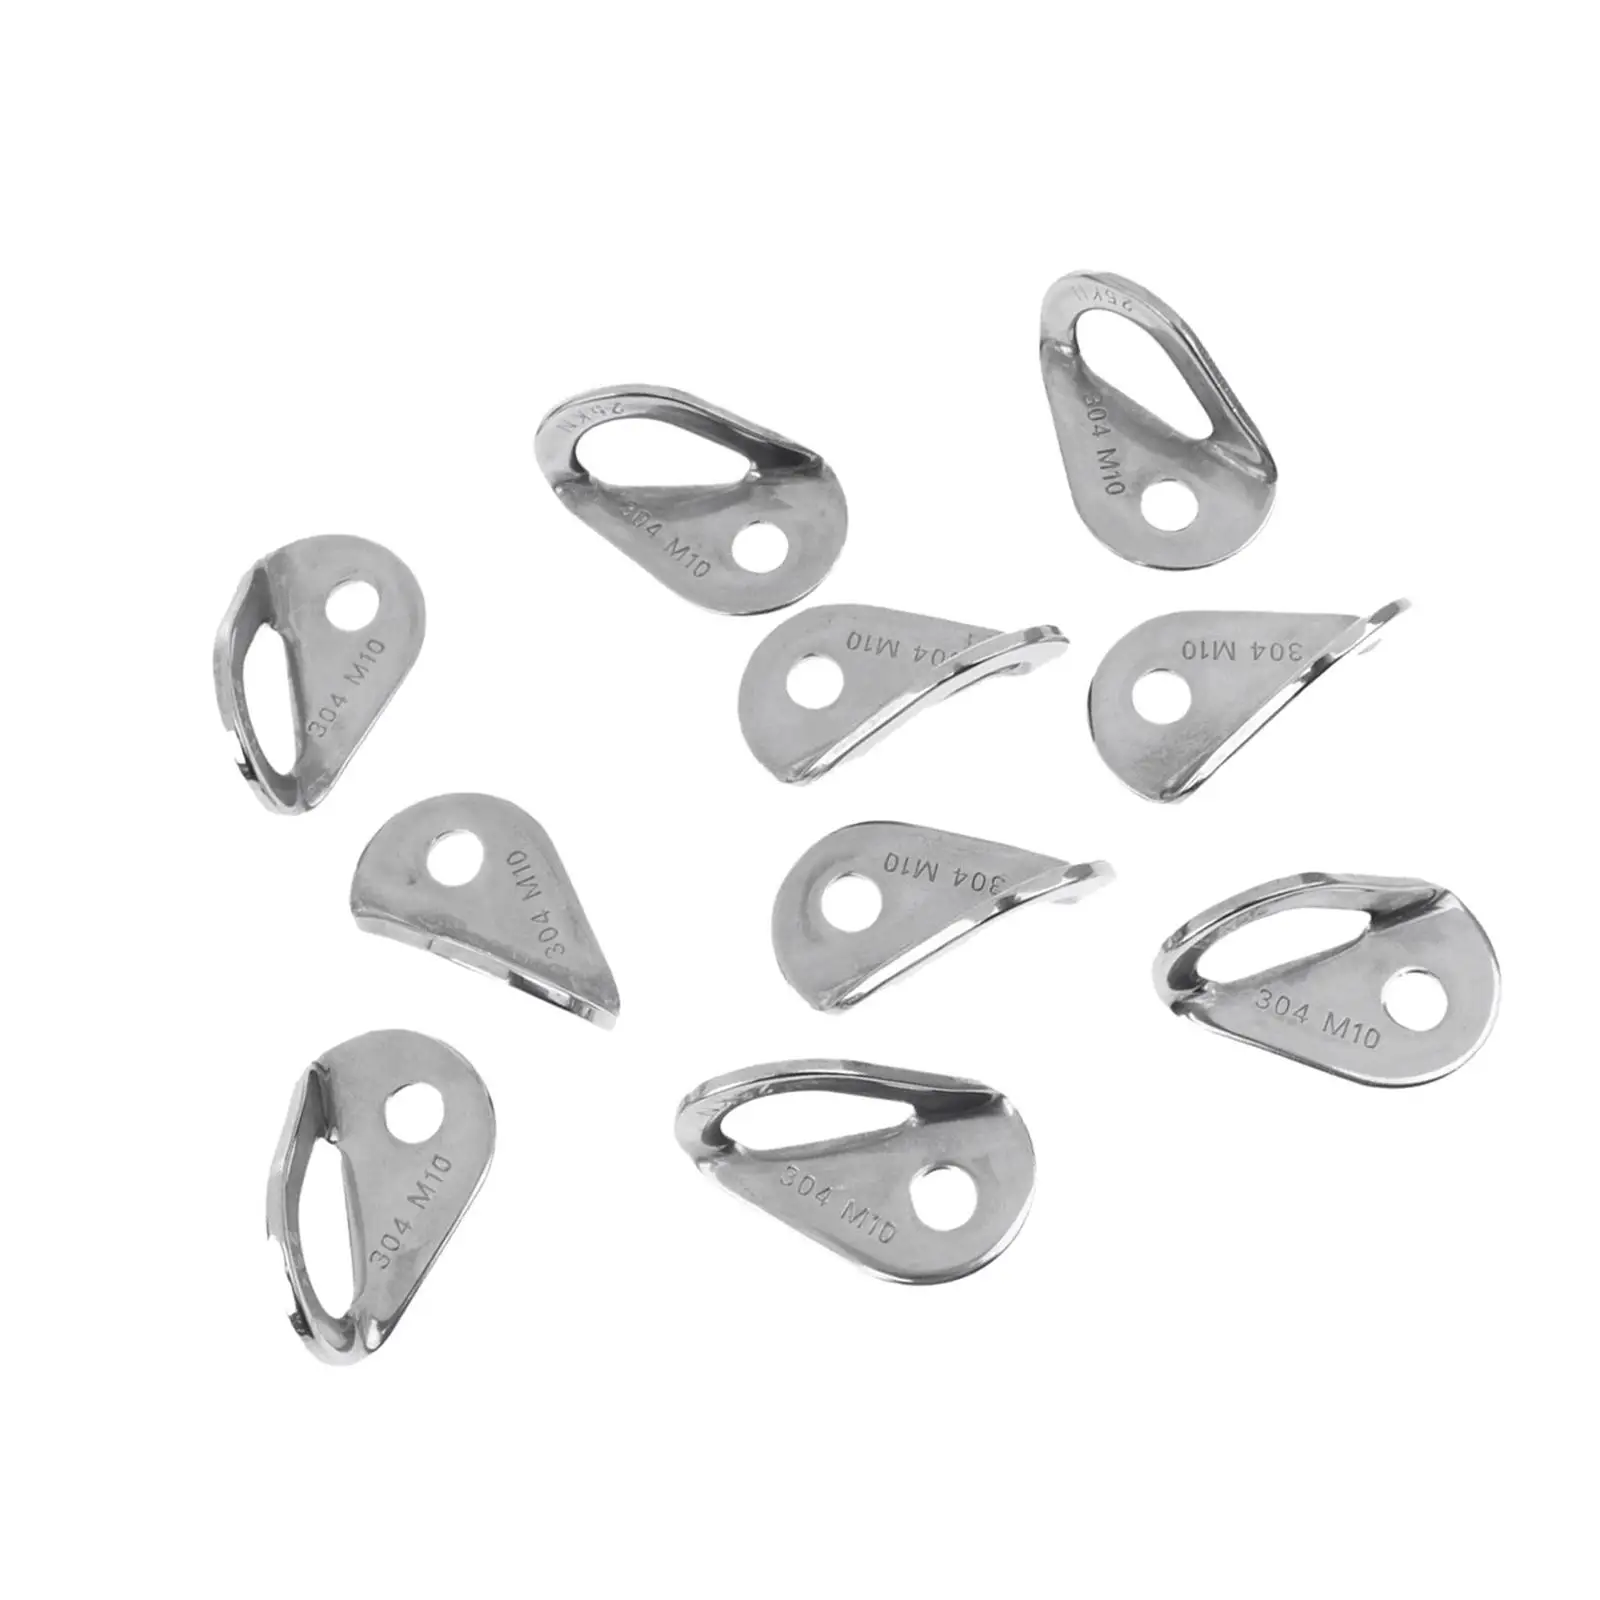 10Pcs Rock Climbing Anchor Bolt Hanger 304 Stainless Steel Anchor Plate for Engineering Outdoor Sports Belay Rappelling Travel